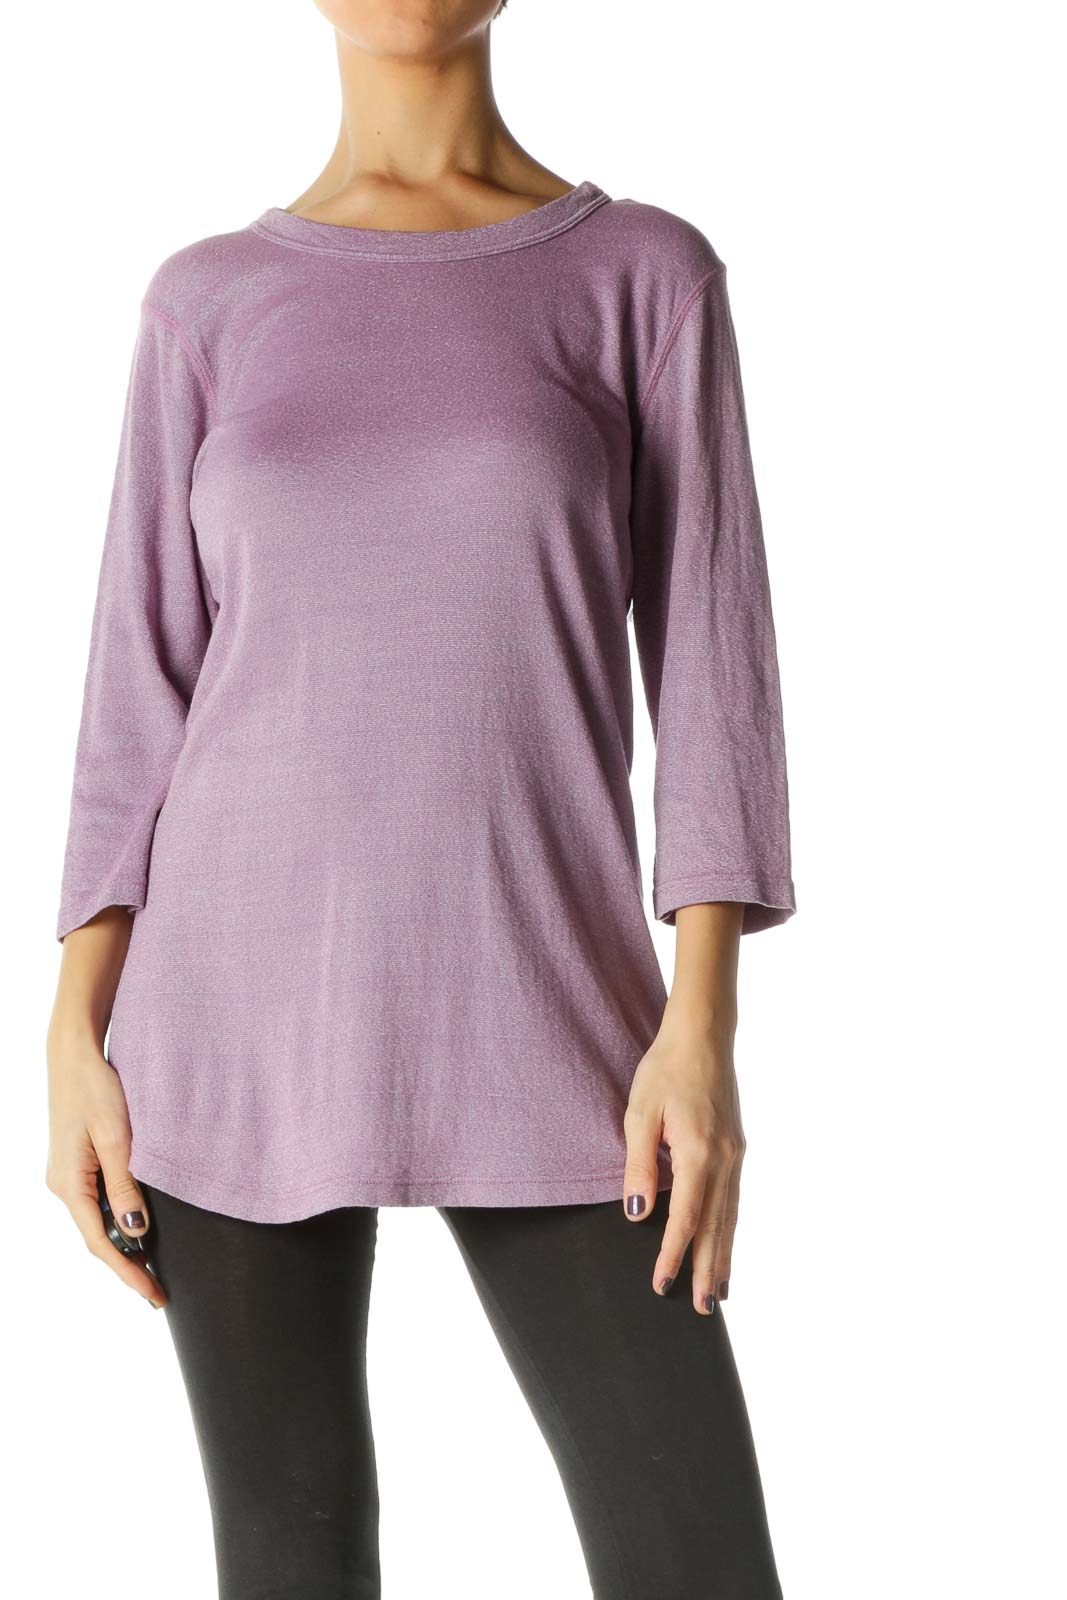 Purple Solid Boatneck Casual Blouse Front